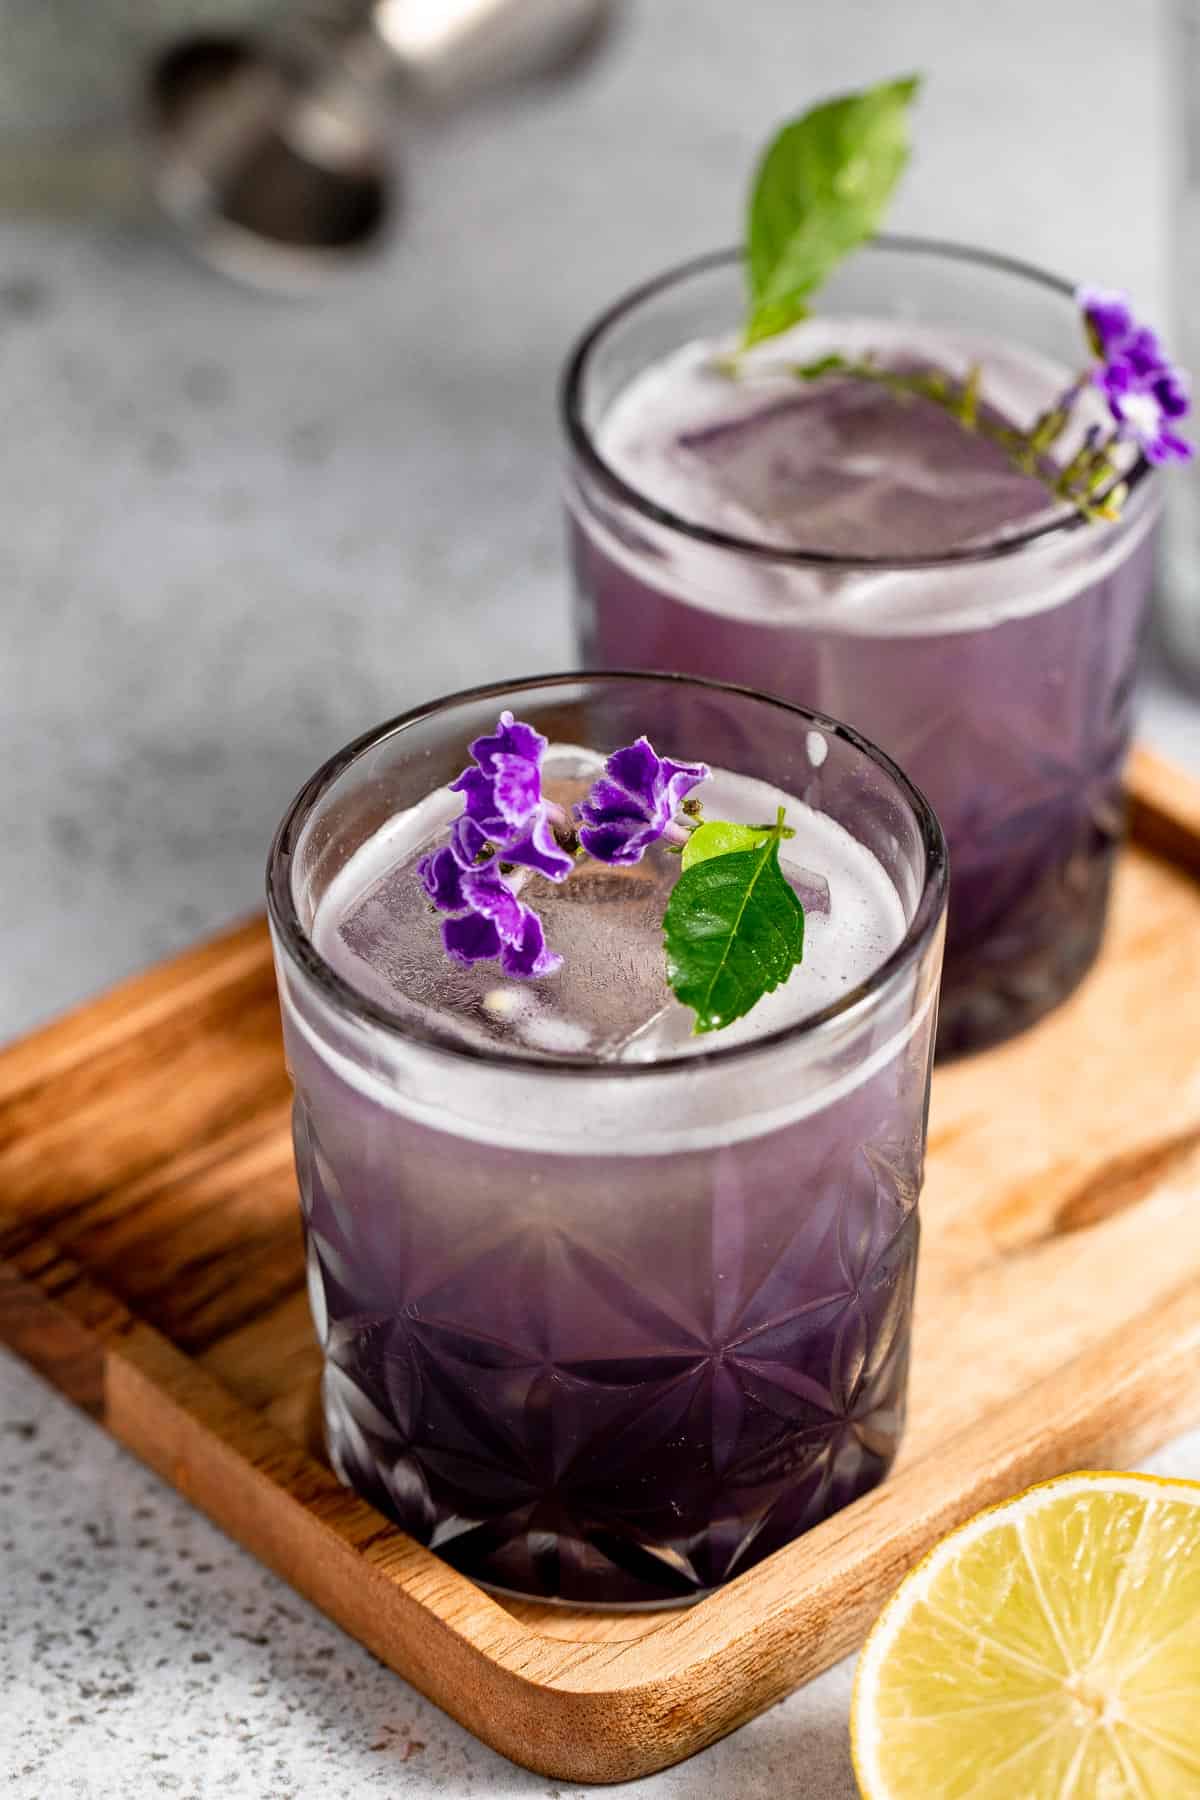 Empress Gin Cocktails with edible flowers served on a wooden tray